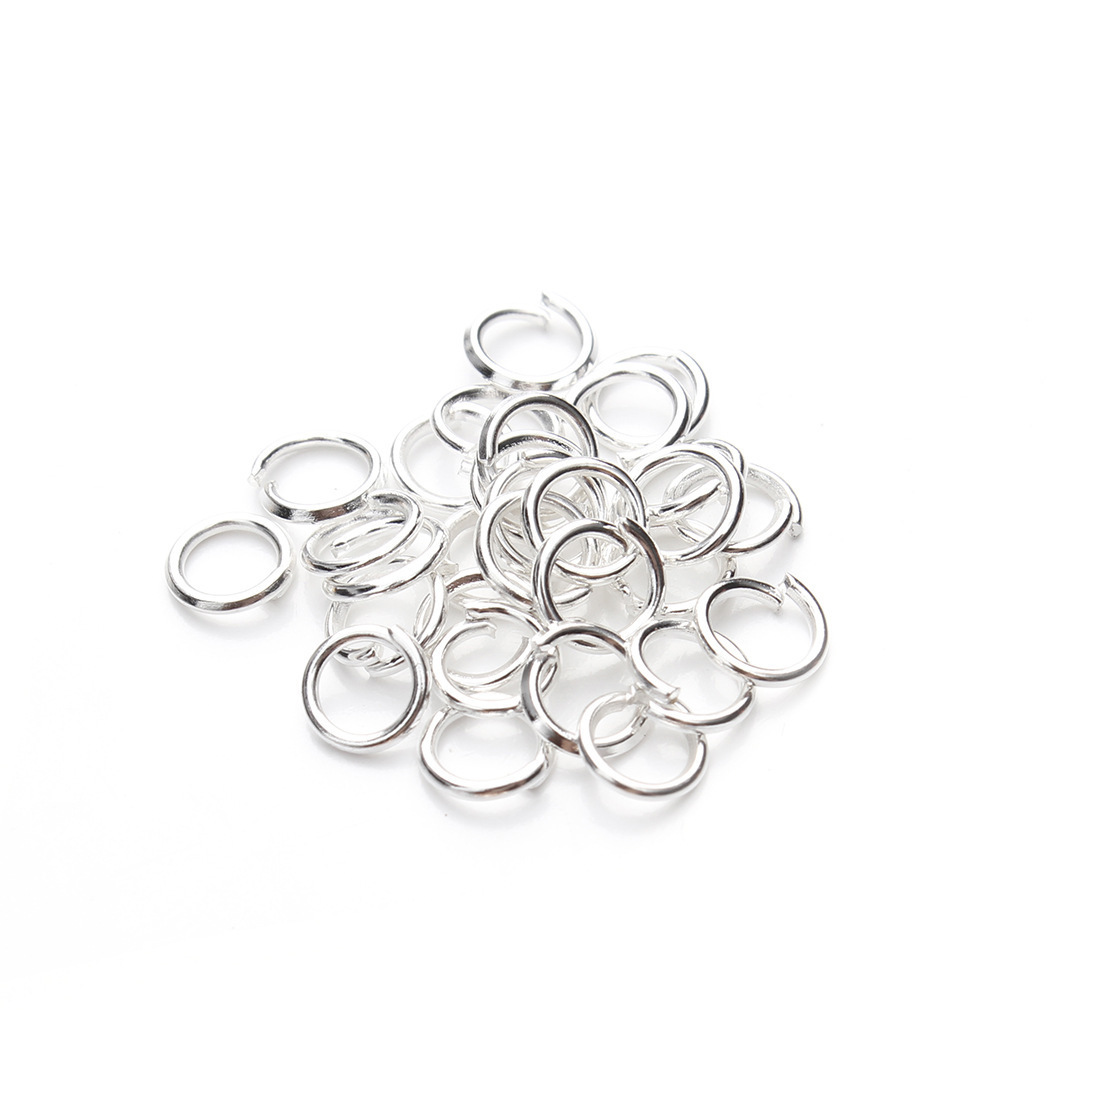 Silver outer diameter 3mm